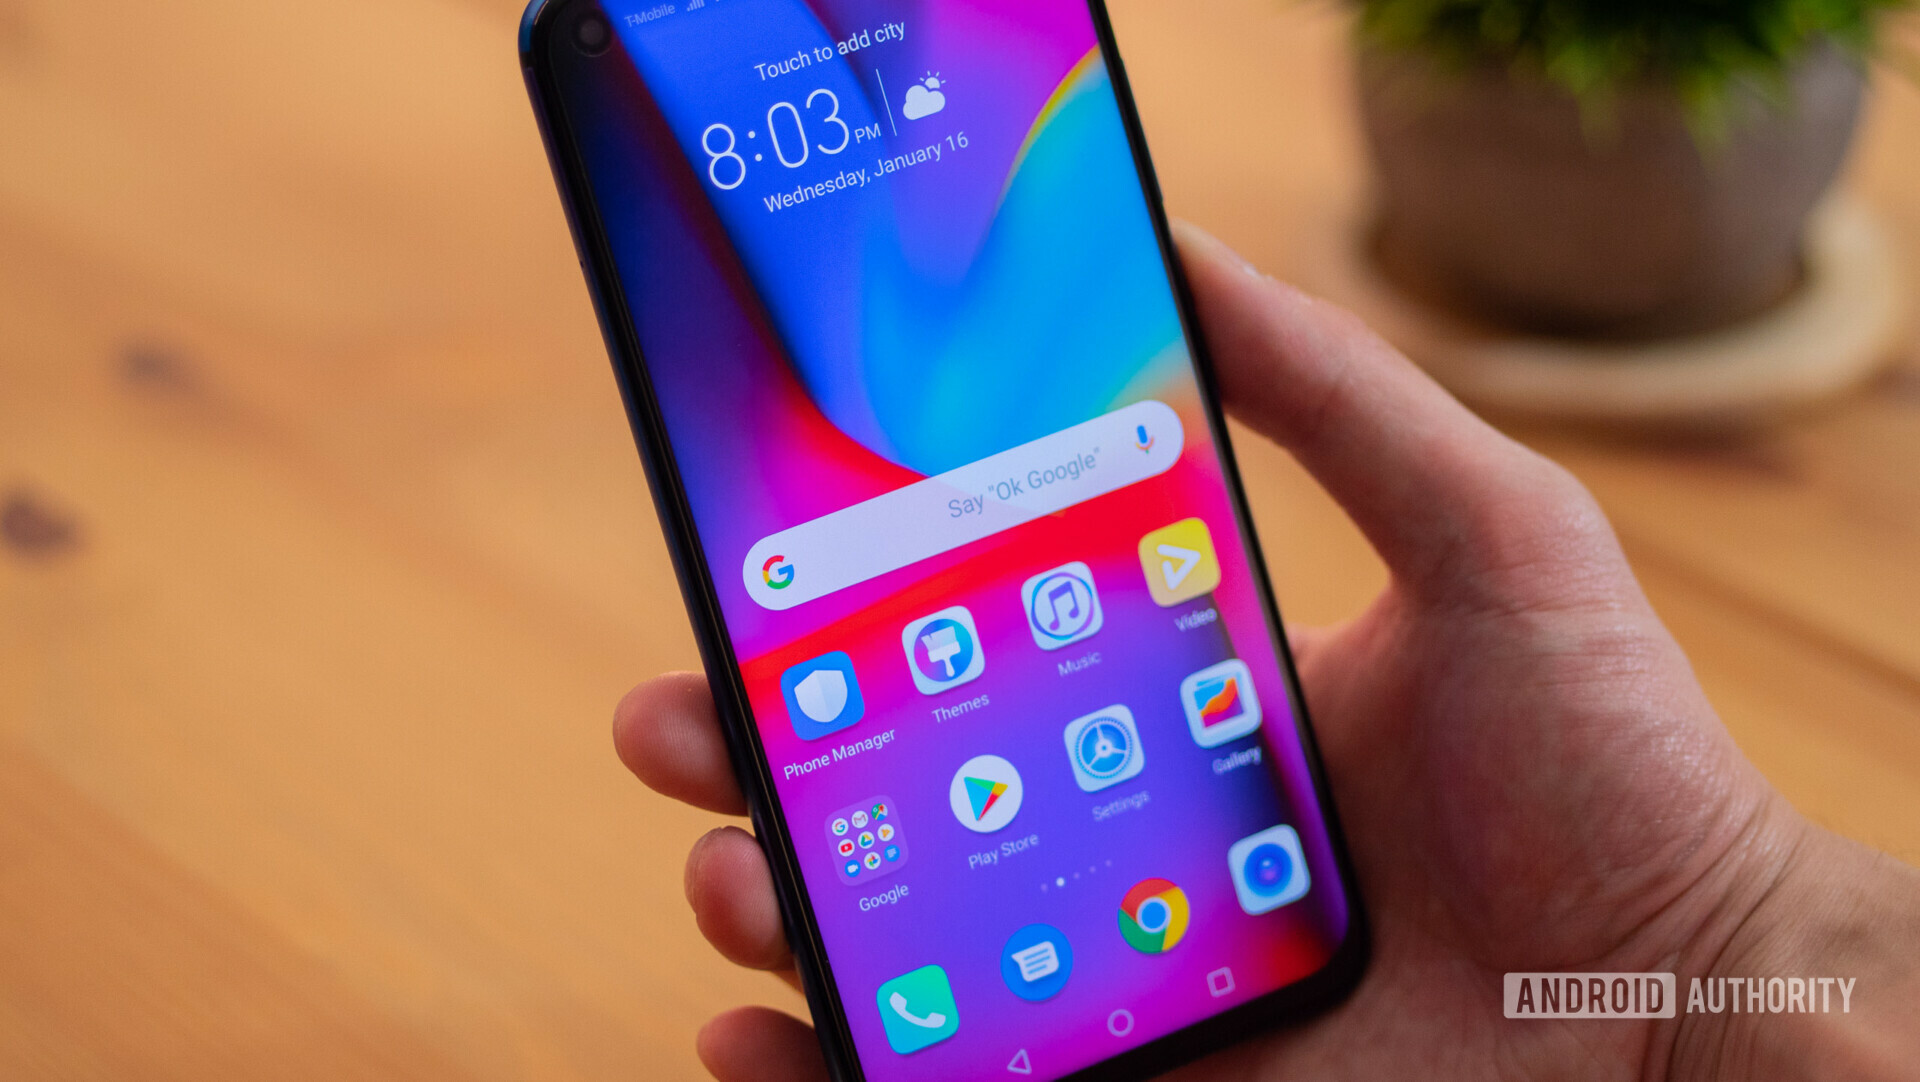 honor view 20 held in hand